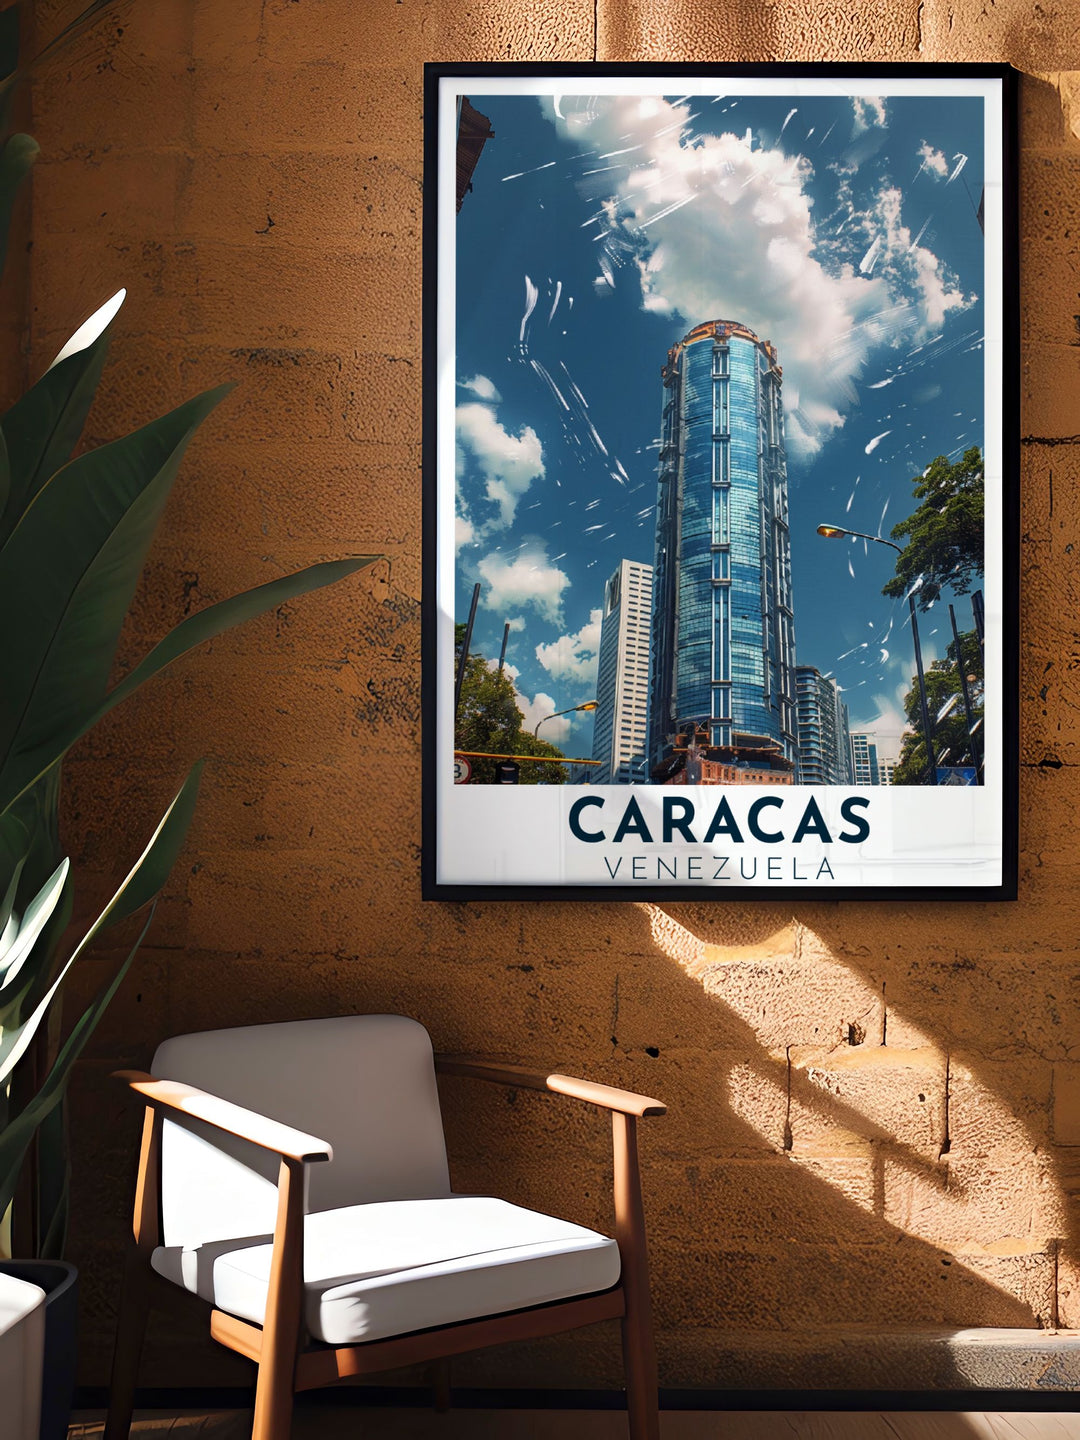 The captivating blend of sleek skyscrapers and lively urban scenes in Caracas and Parque Central Complex is beautifully illustrated in this poster, making it a stunning addition to any wall art collection celebrating Venezuela.